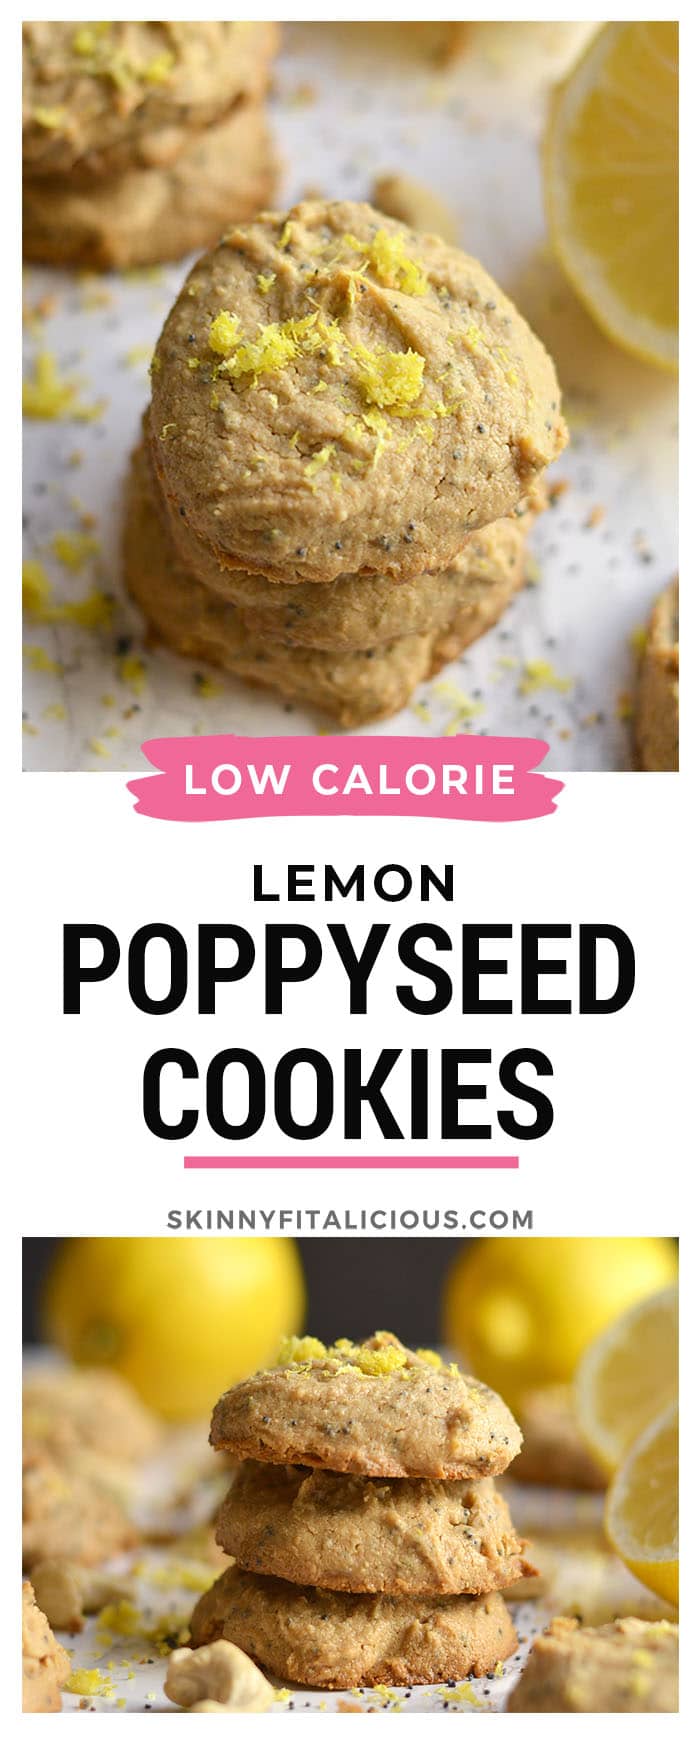 Lemon Poppy Seed Cashew Cookies! Made flourless with nut butter and only 5 ingredients, these bursting with citrus goodies are sure to brighten any day! Paleo + Vegan + Gluten Free + Low Calorie